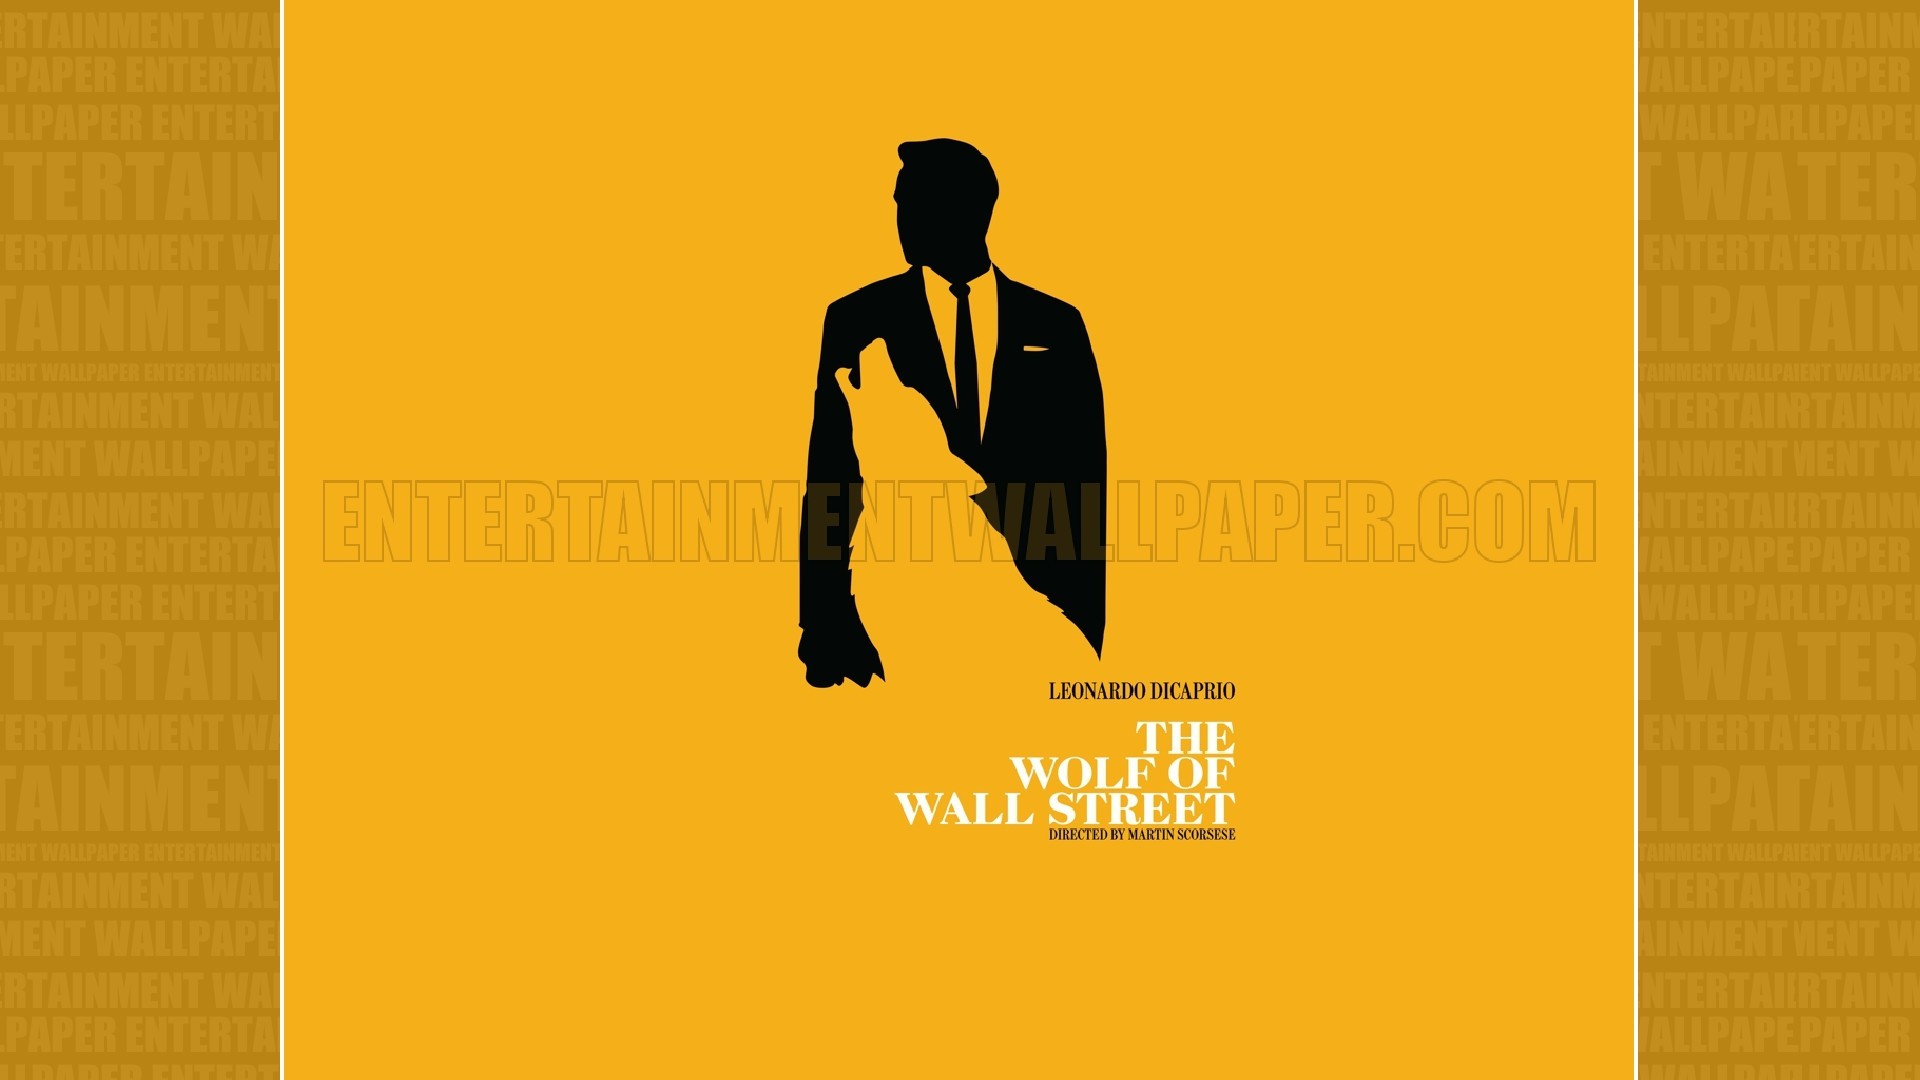 The wolf of wall street 1080P 2K 4K 5K HD wallpapers free download   Wallpaper Flare